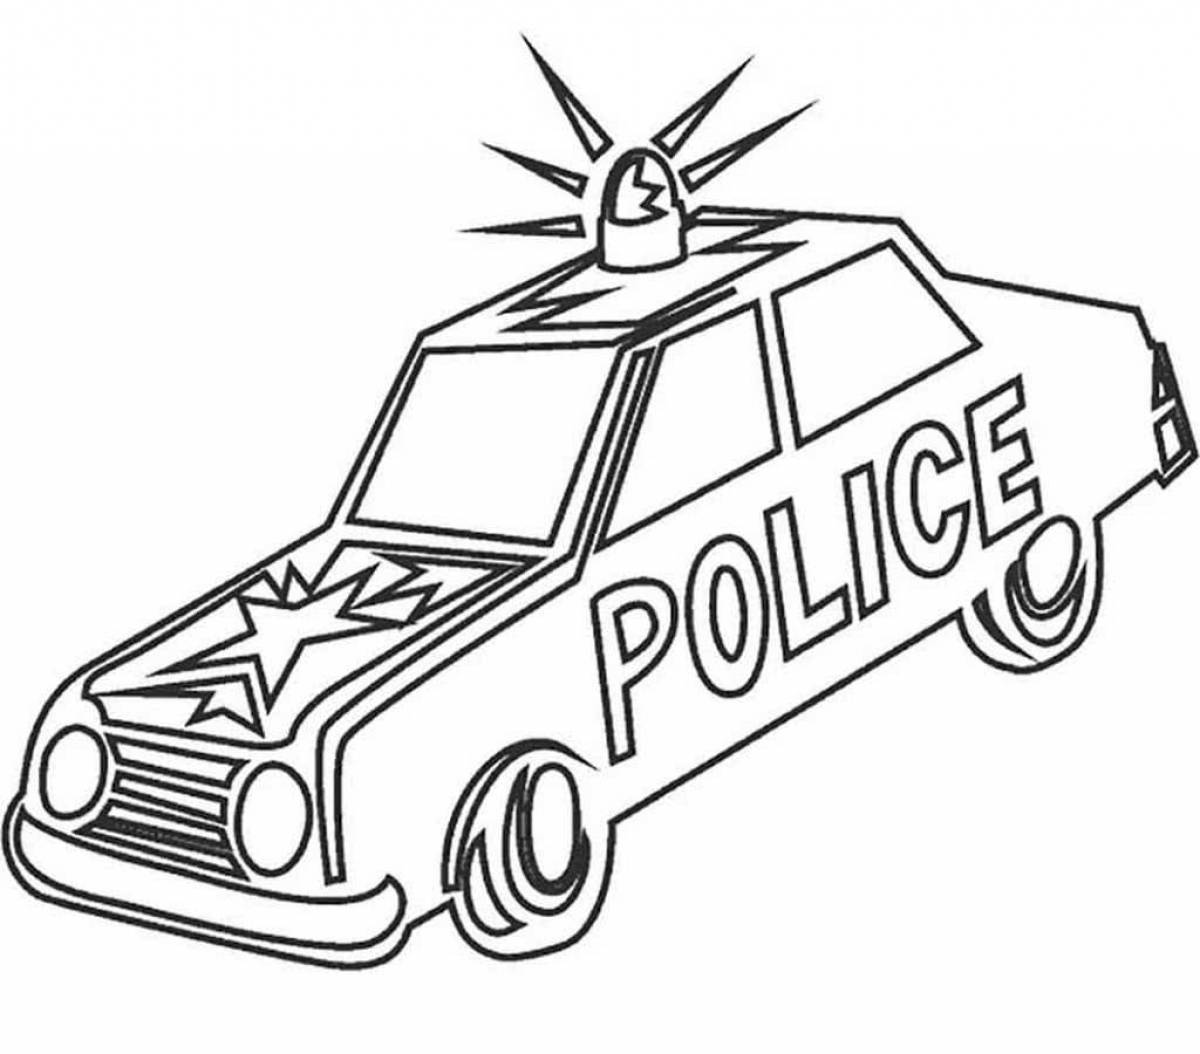 Bright police car coloring book for kids